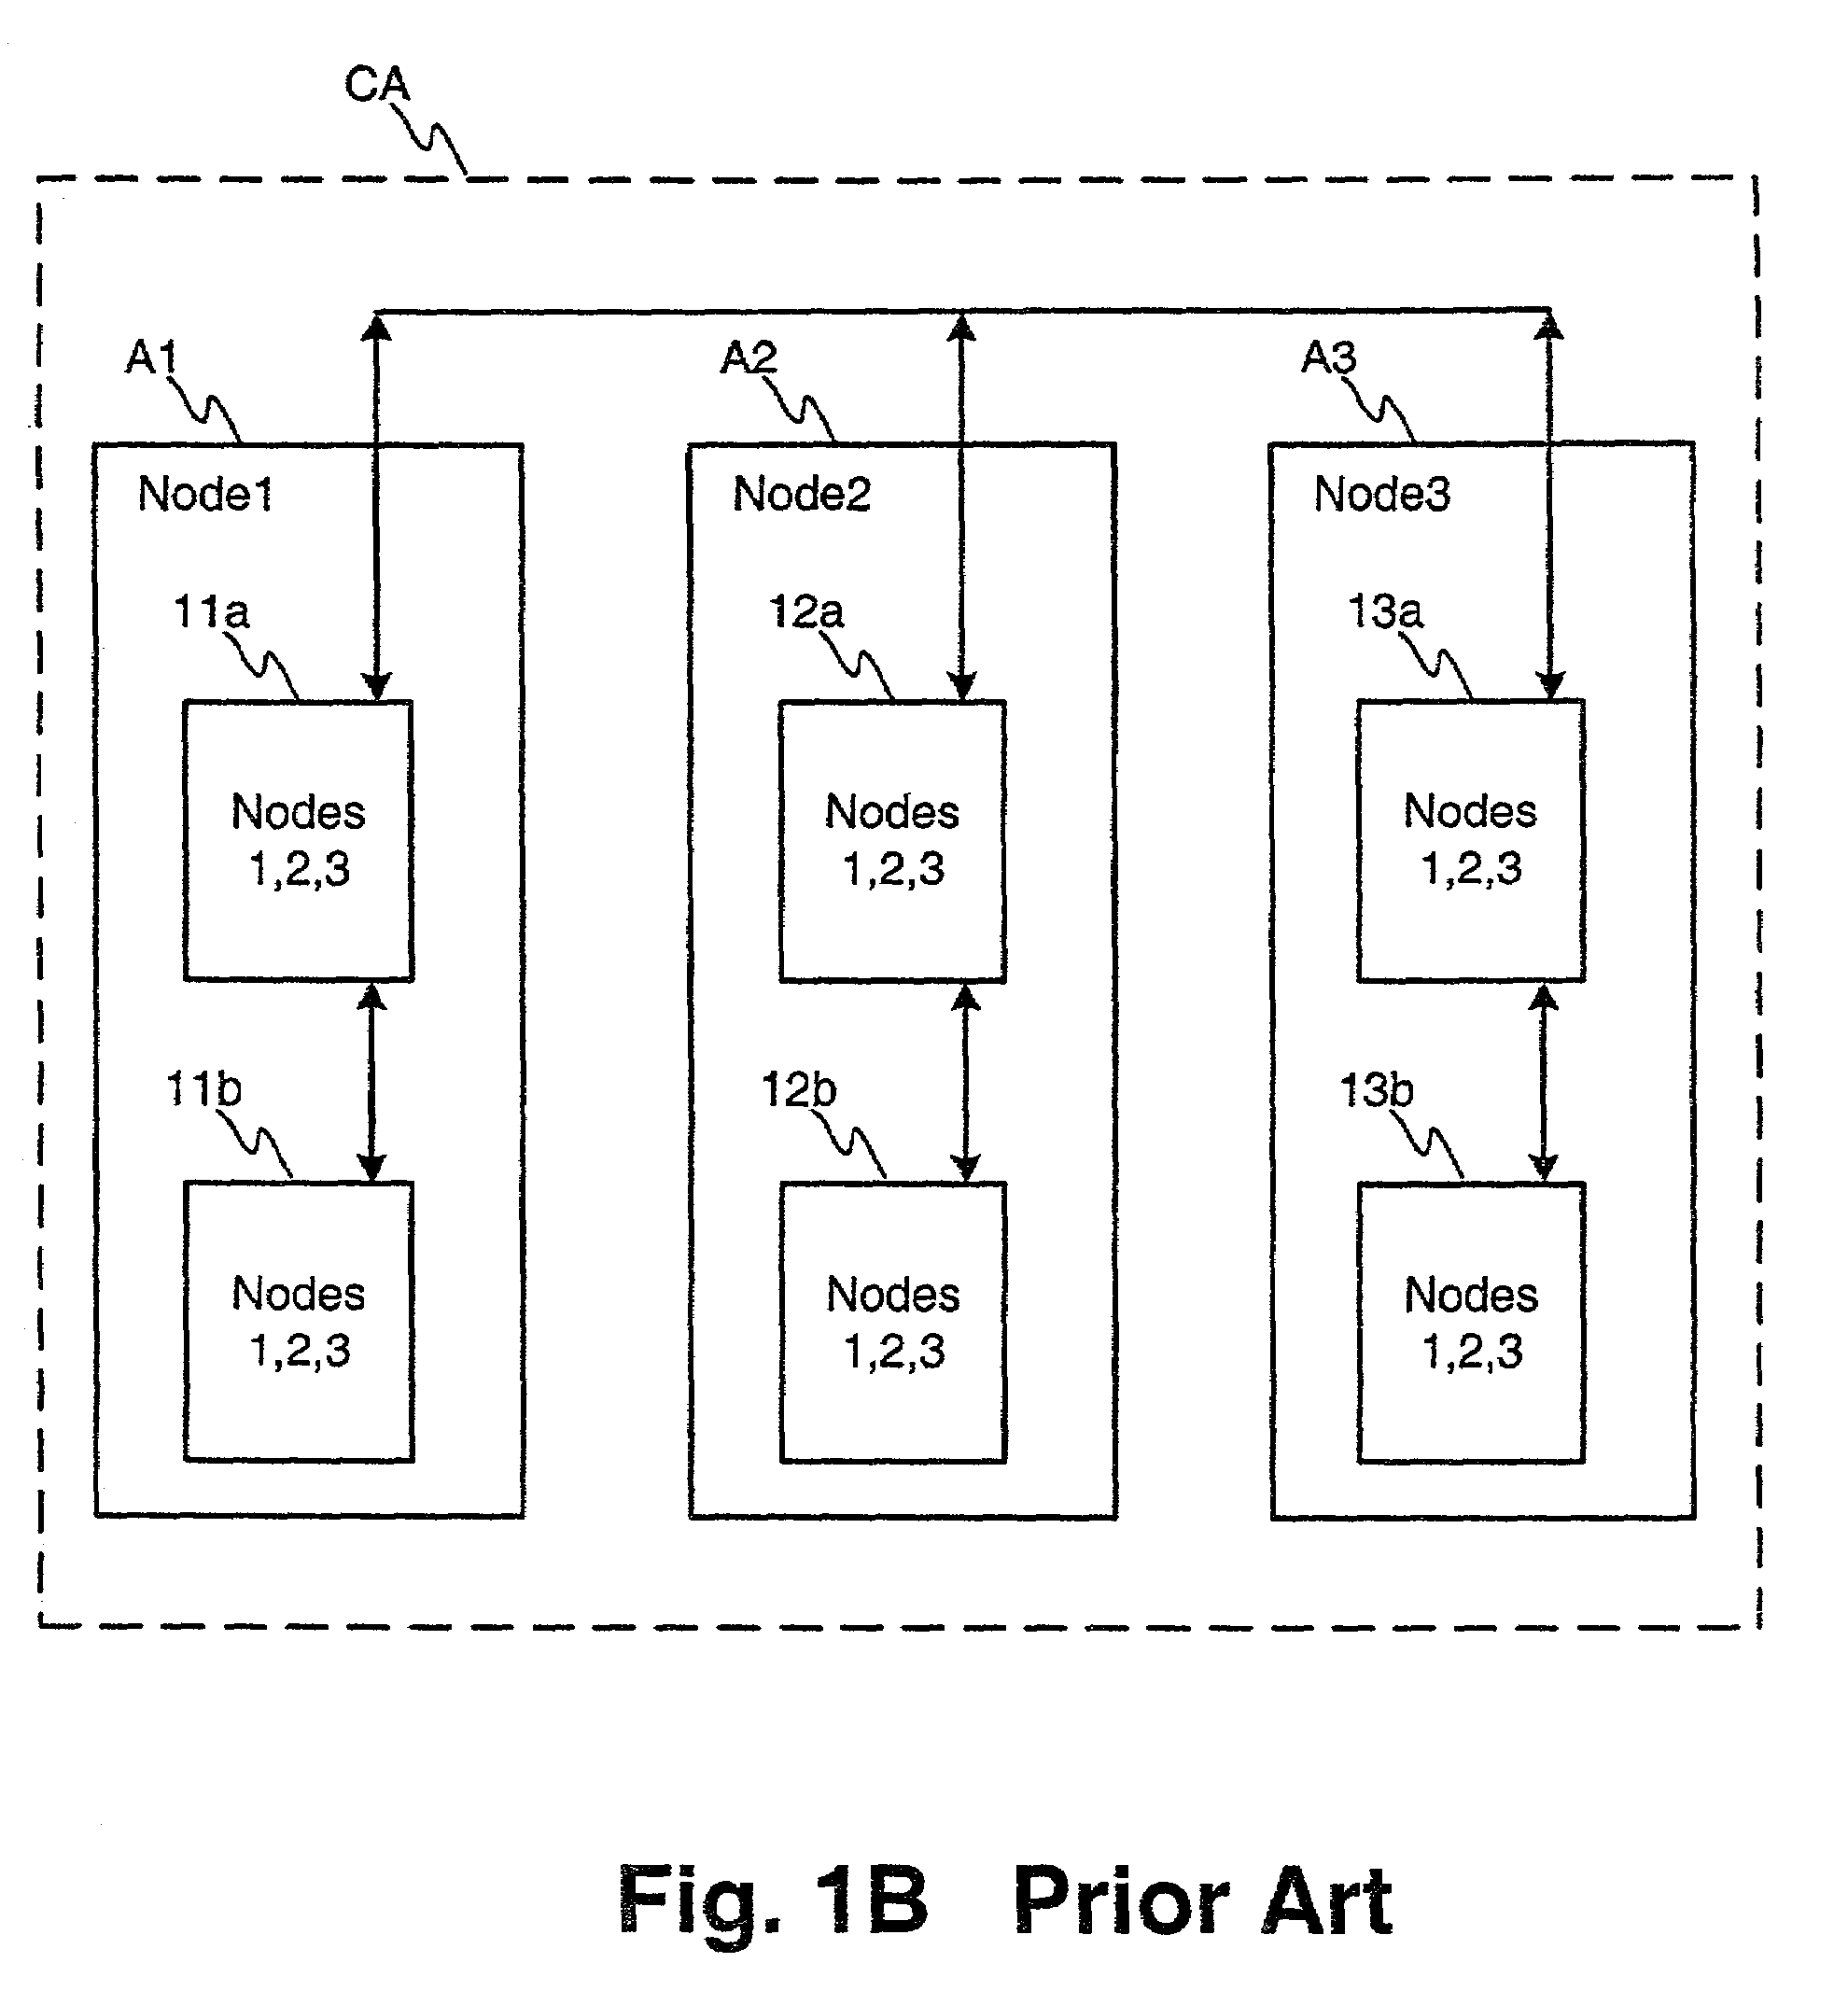 Handling state information in a network element cluster